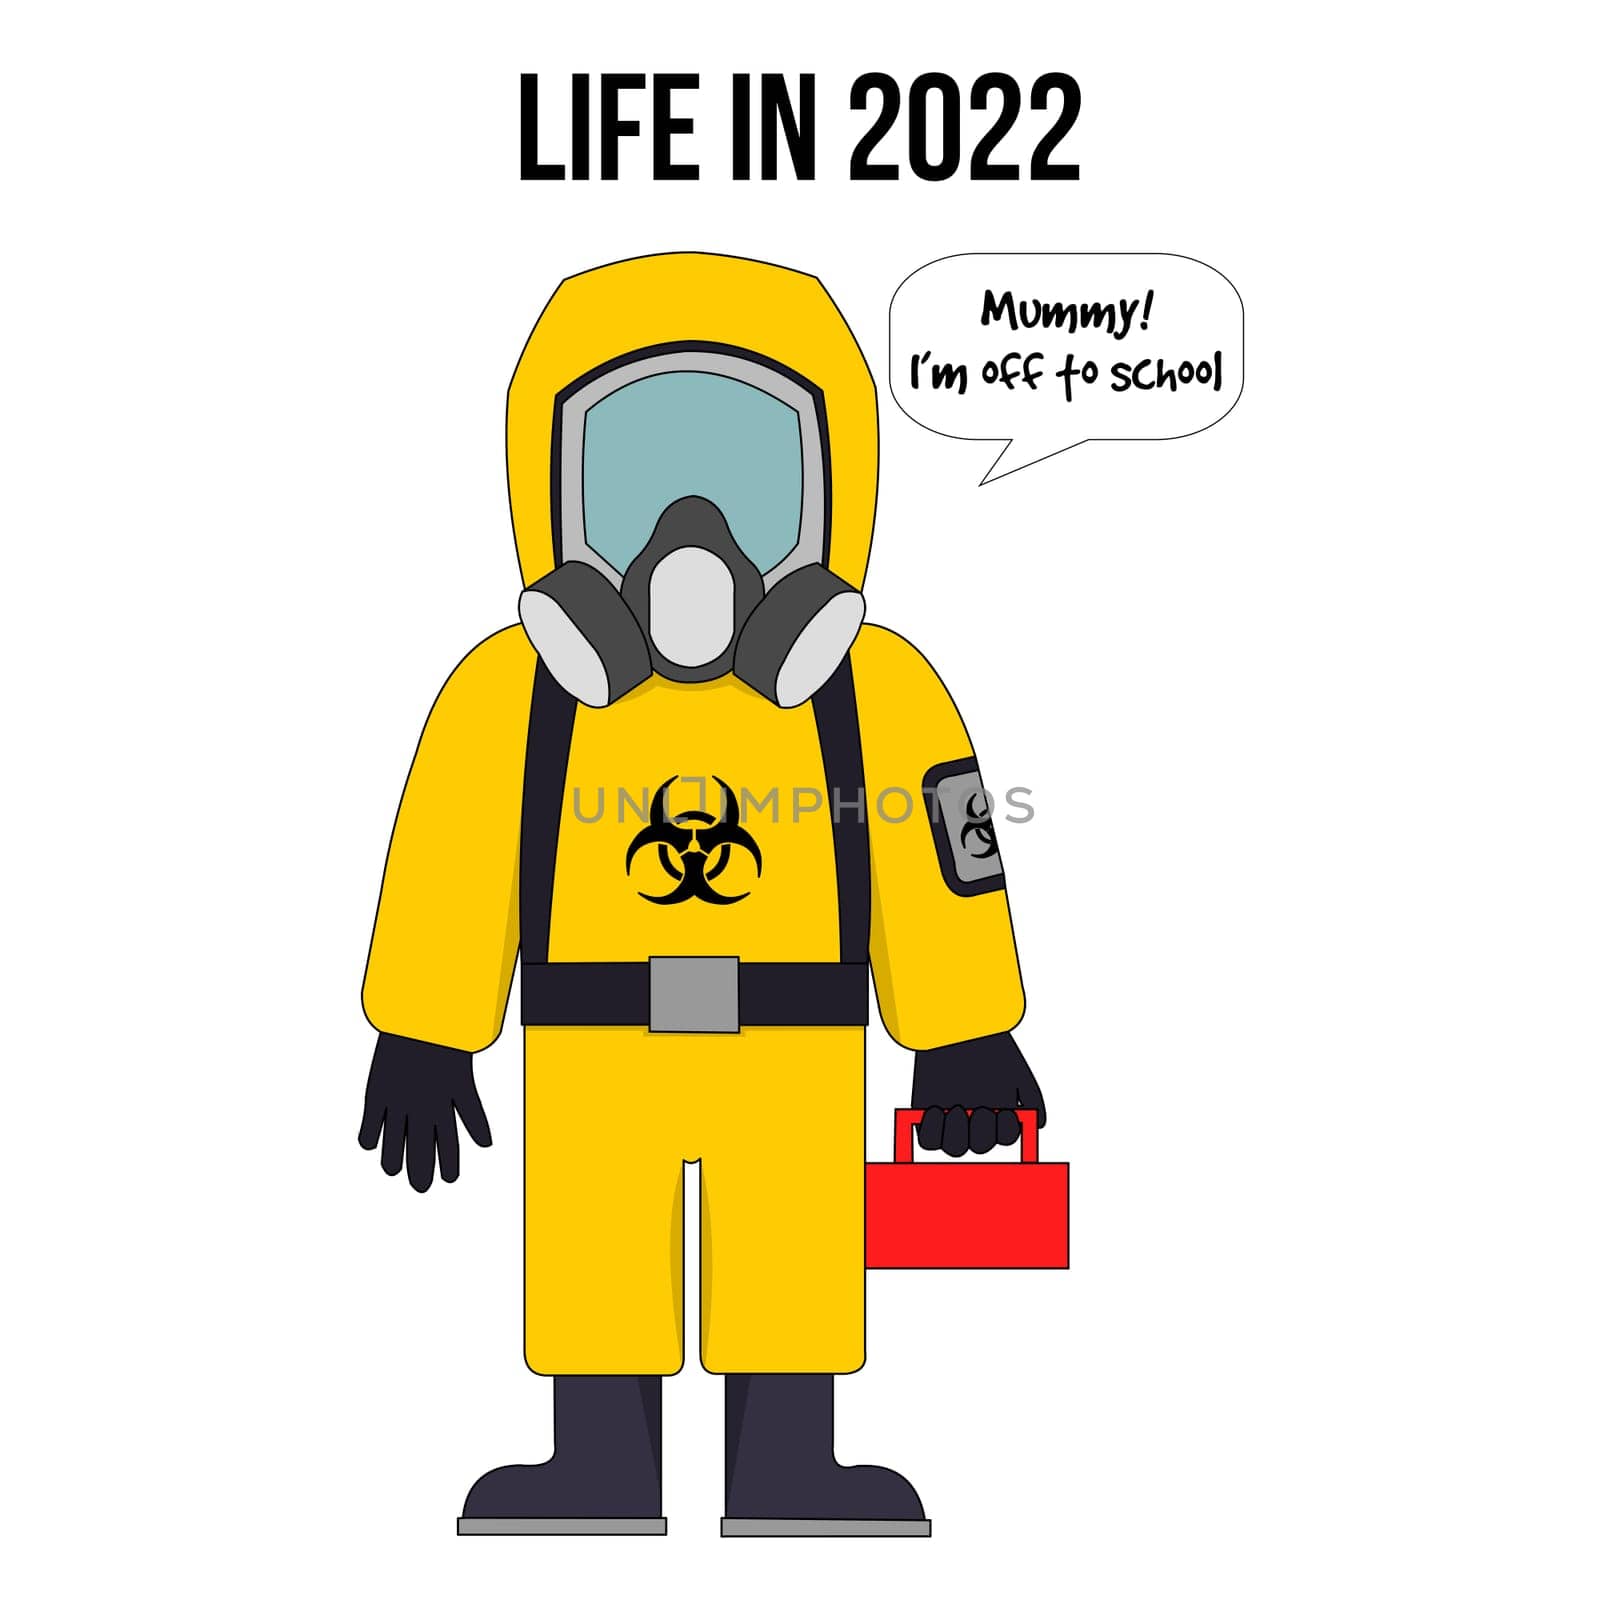 A child going to school wearing a hazard suit with the text "life in 2022".